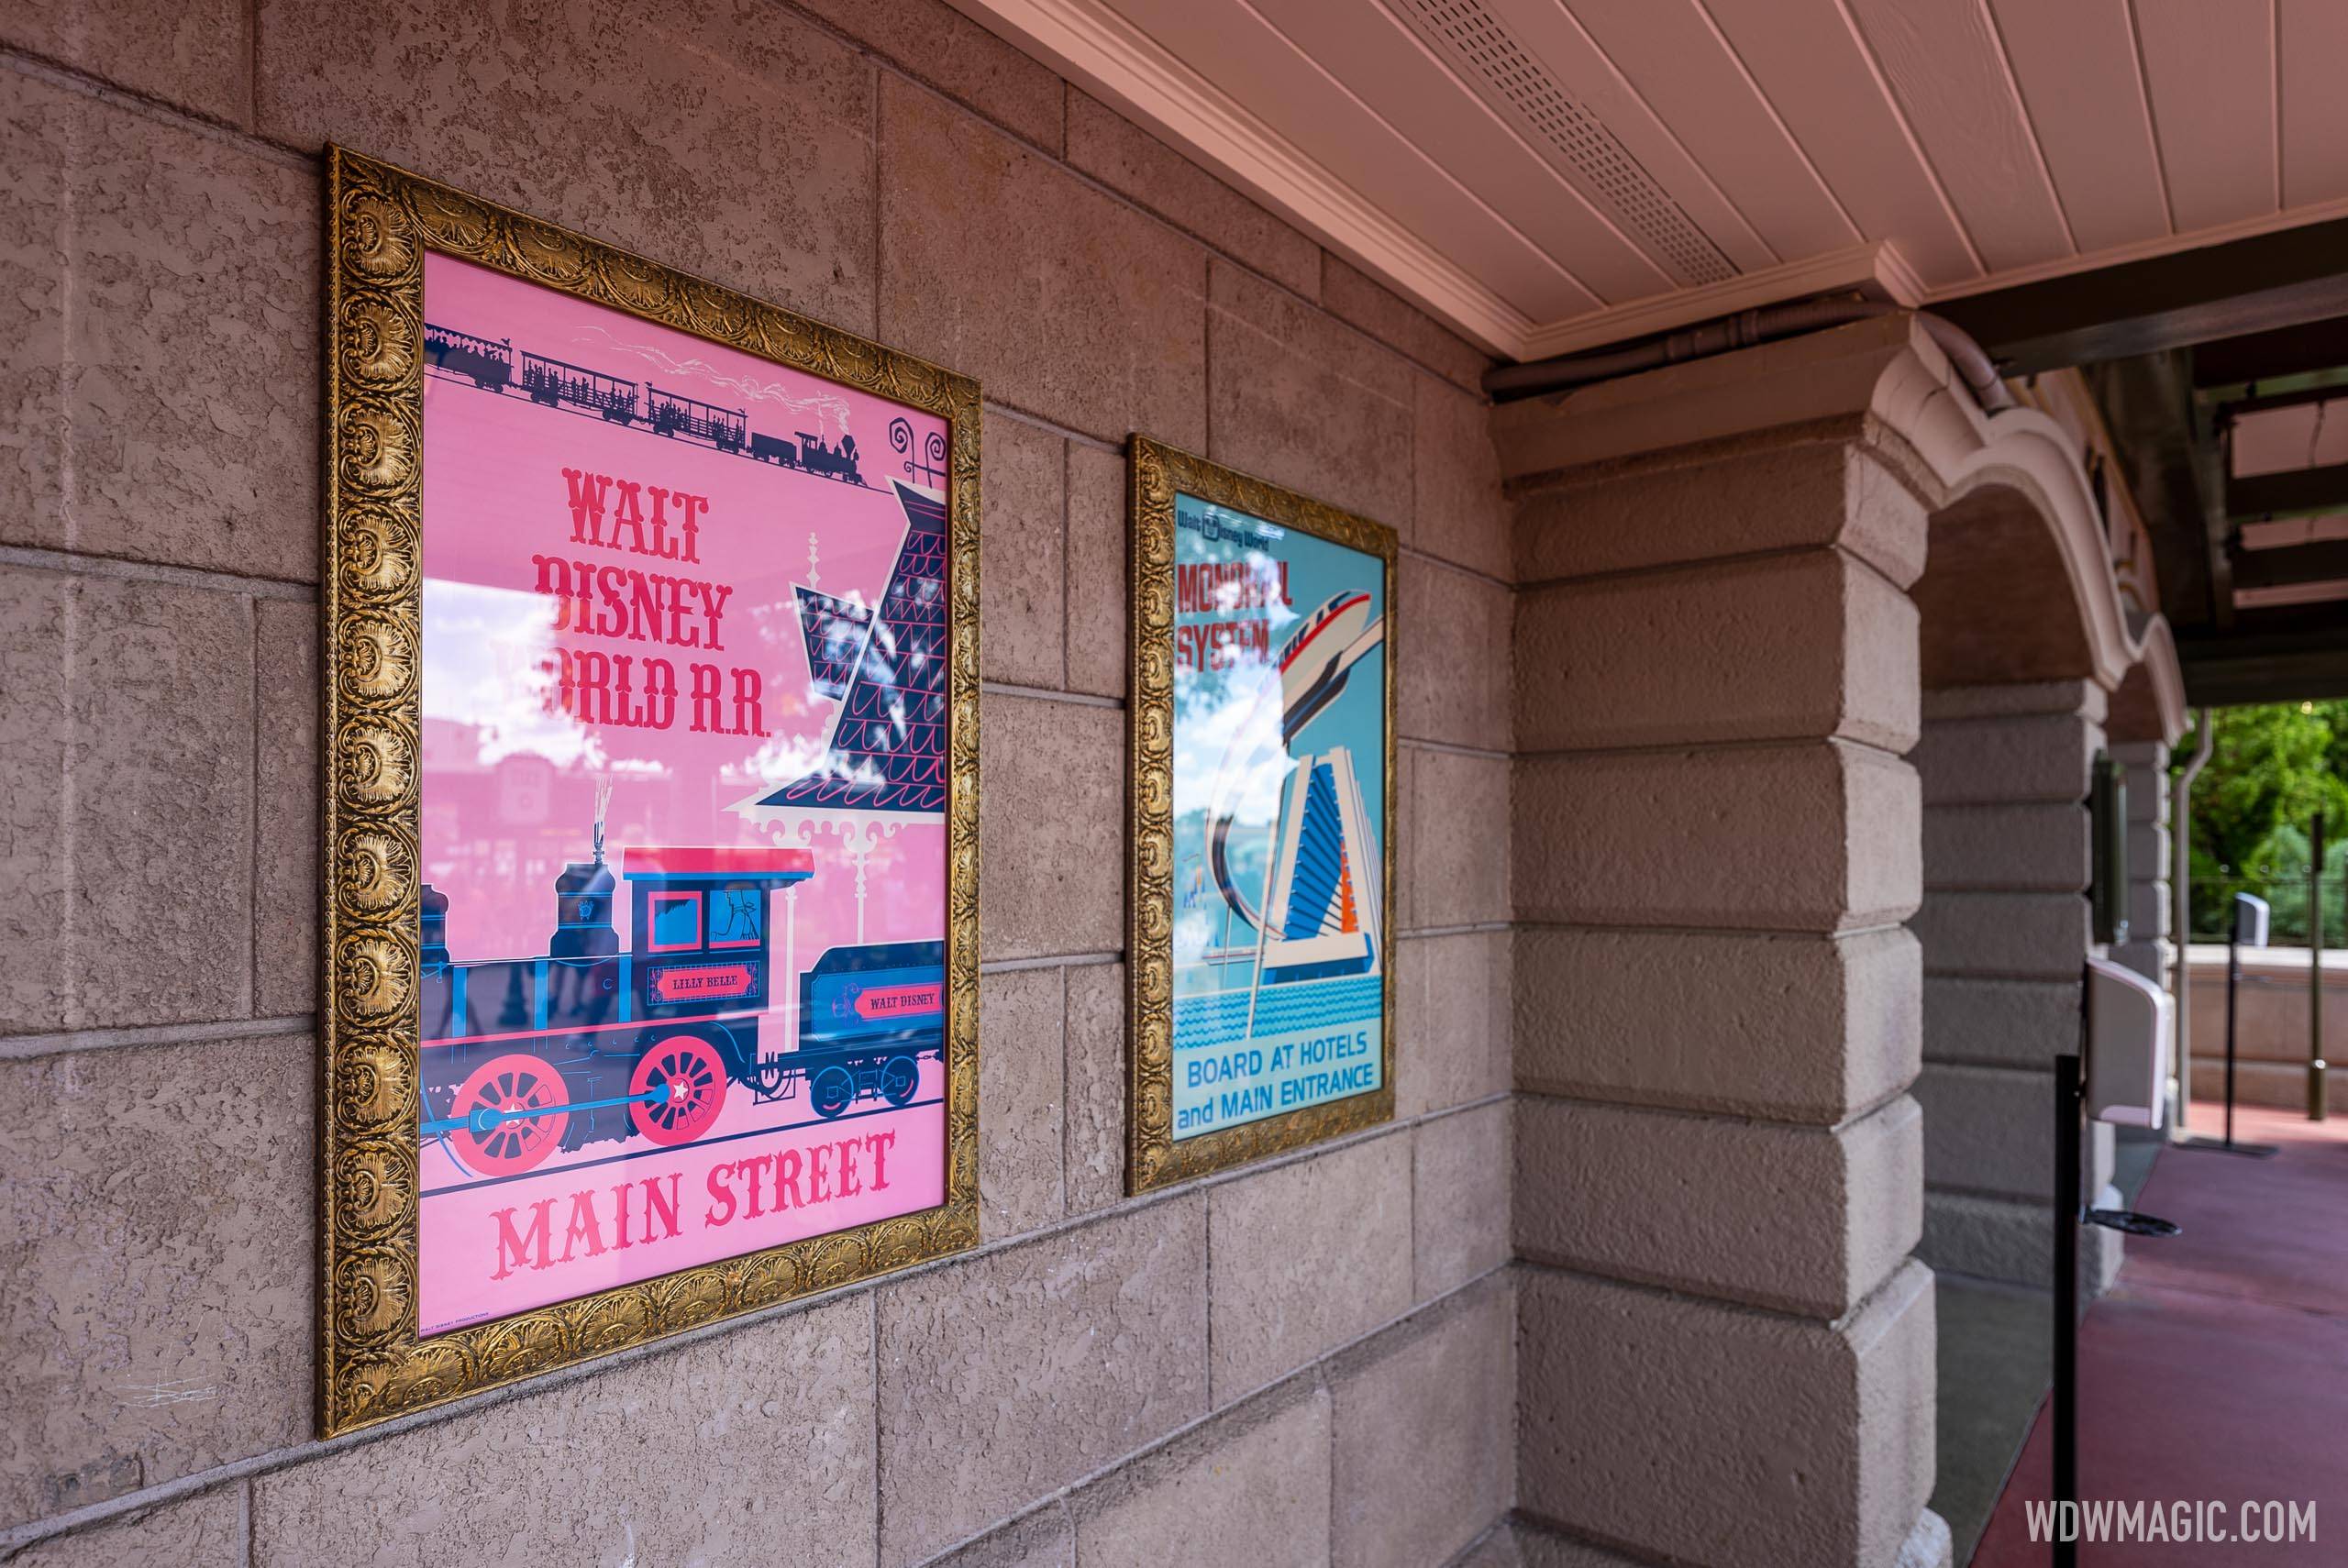 Vintage attraction posters go on display in the Magic Kingdom's main entrance tunnels